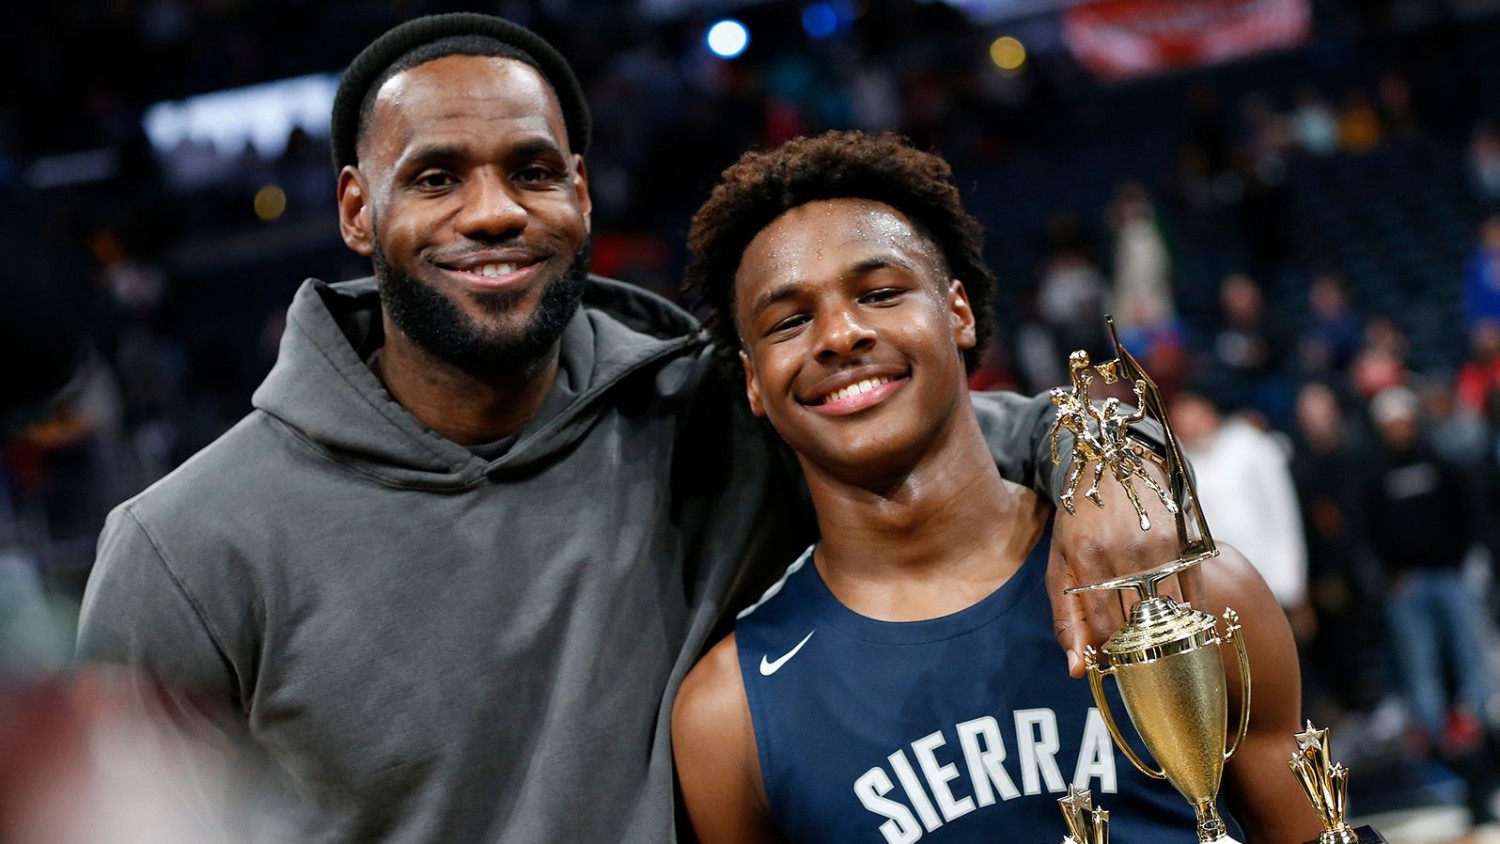 Jay LaPrete/AP LeBron James, left, poses with his son Bronny after Sierra Canyon beat Akron St. Vincent - St. Mary in a high school basketball game on December 14, 2019, in Columbus, Ohio.